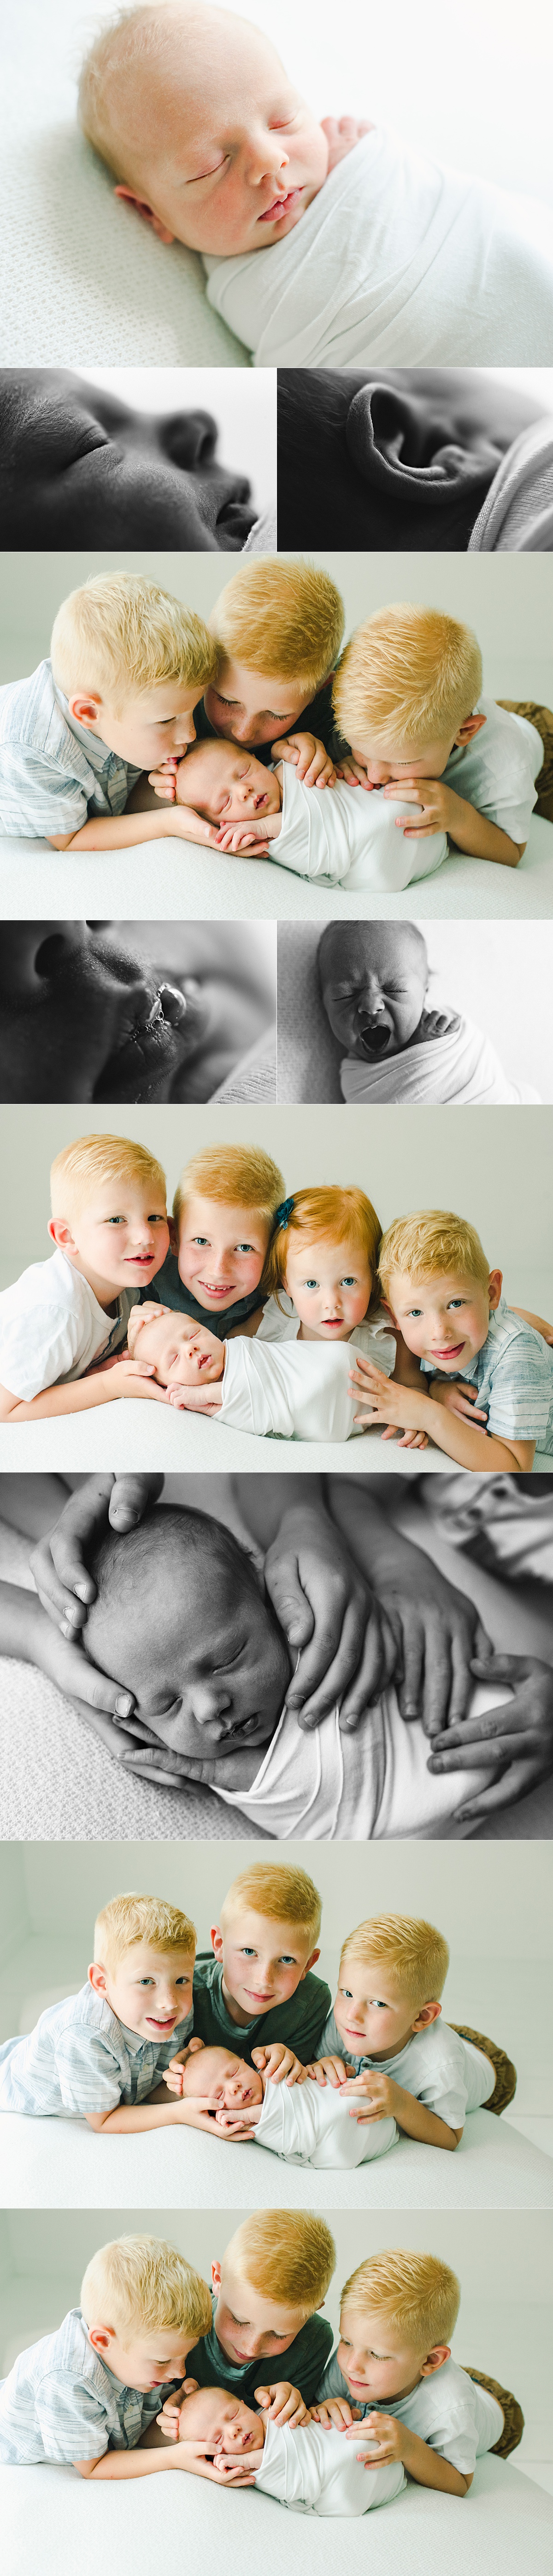 proud older siblings surround newborn baby brother with love 